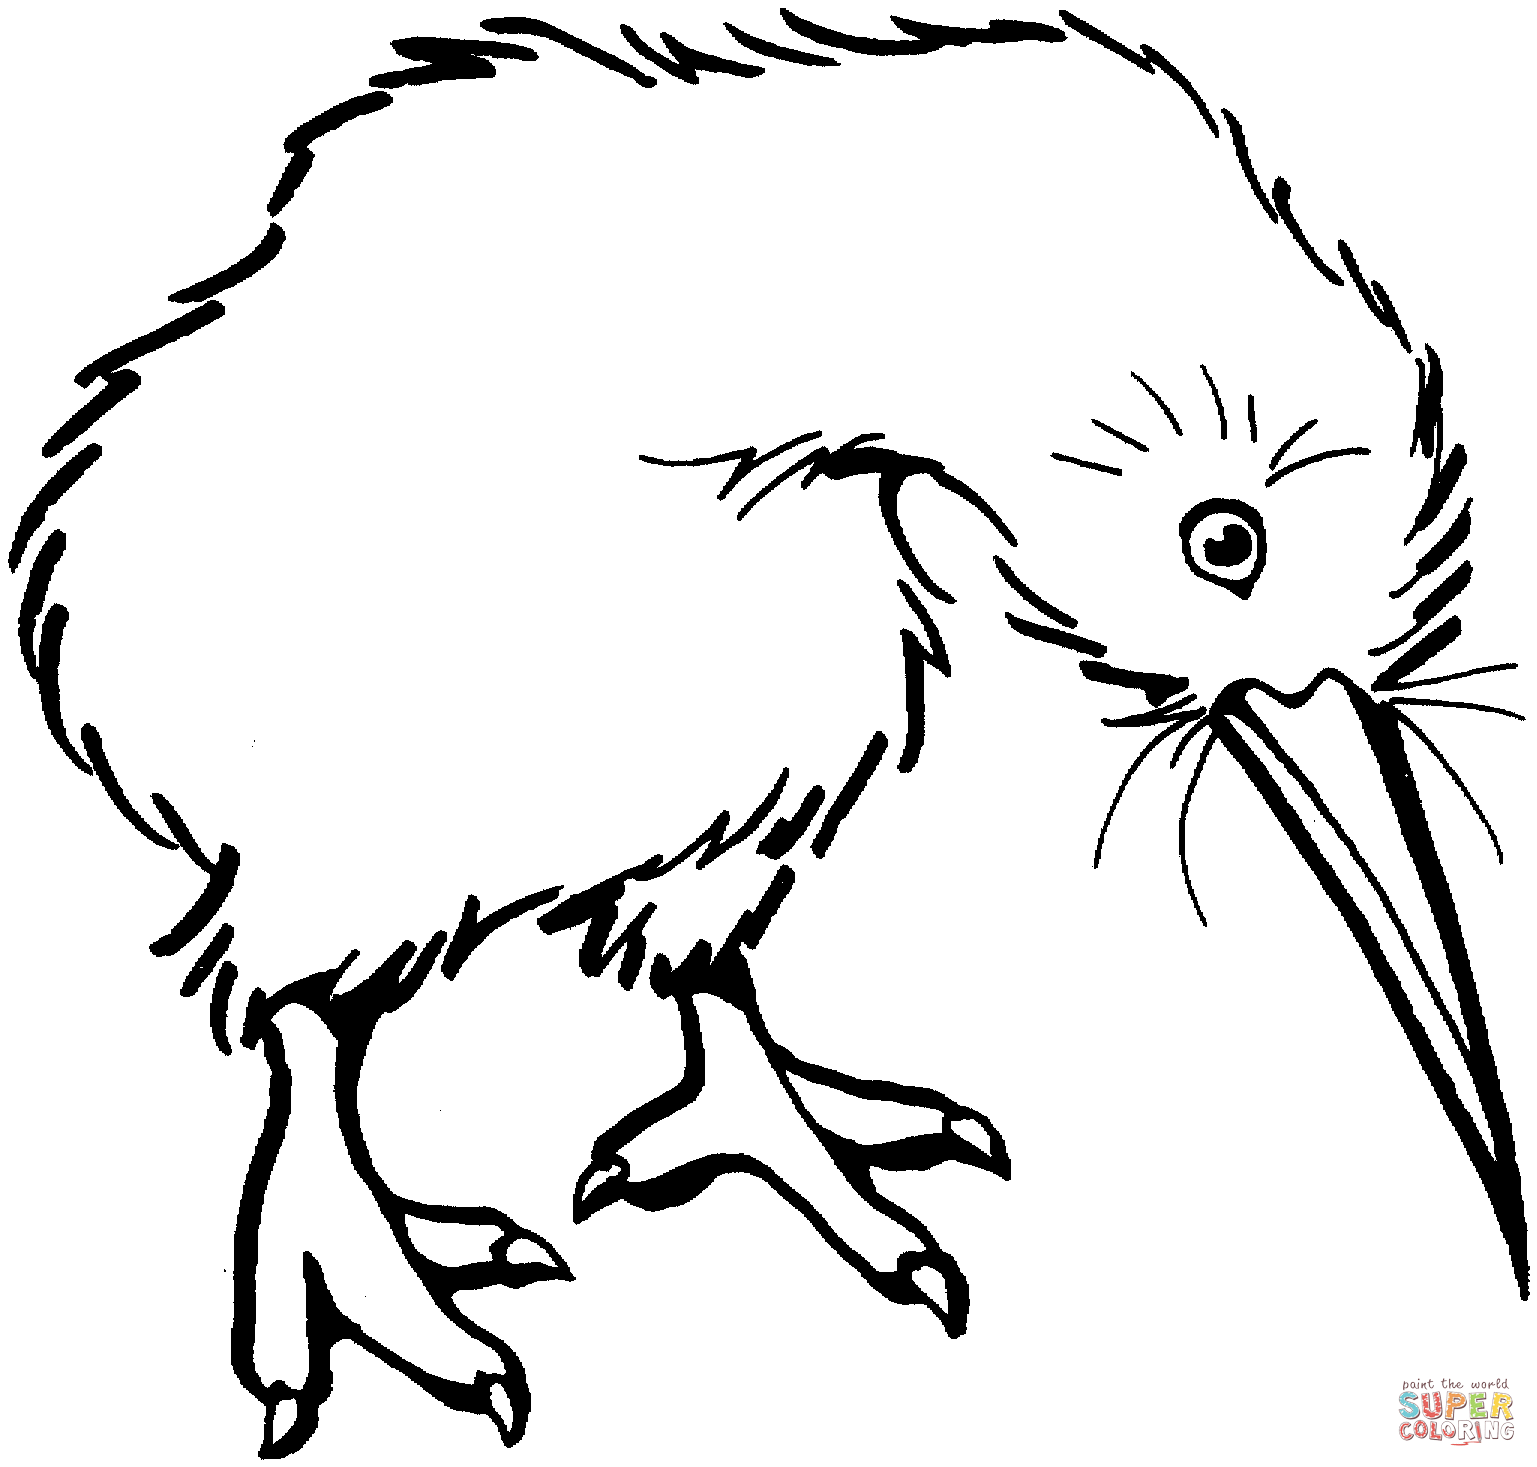 Kiwi Bird coloring page | Free Printable Coloring Pages